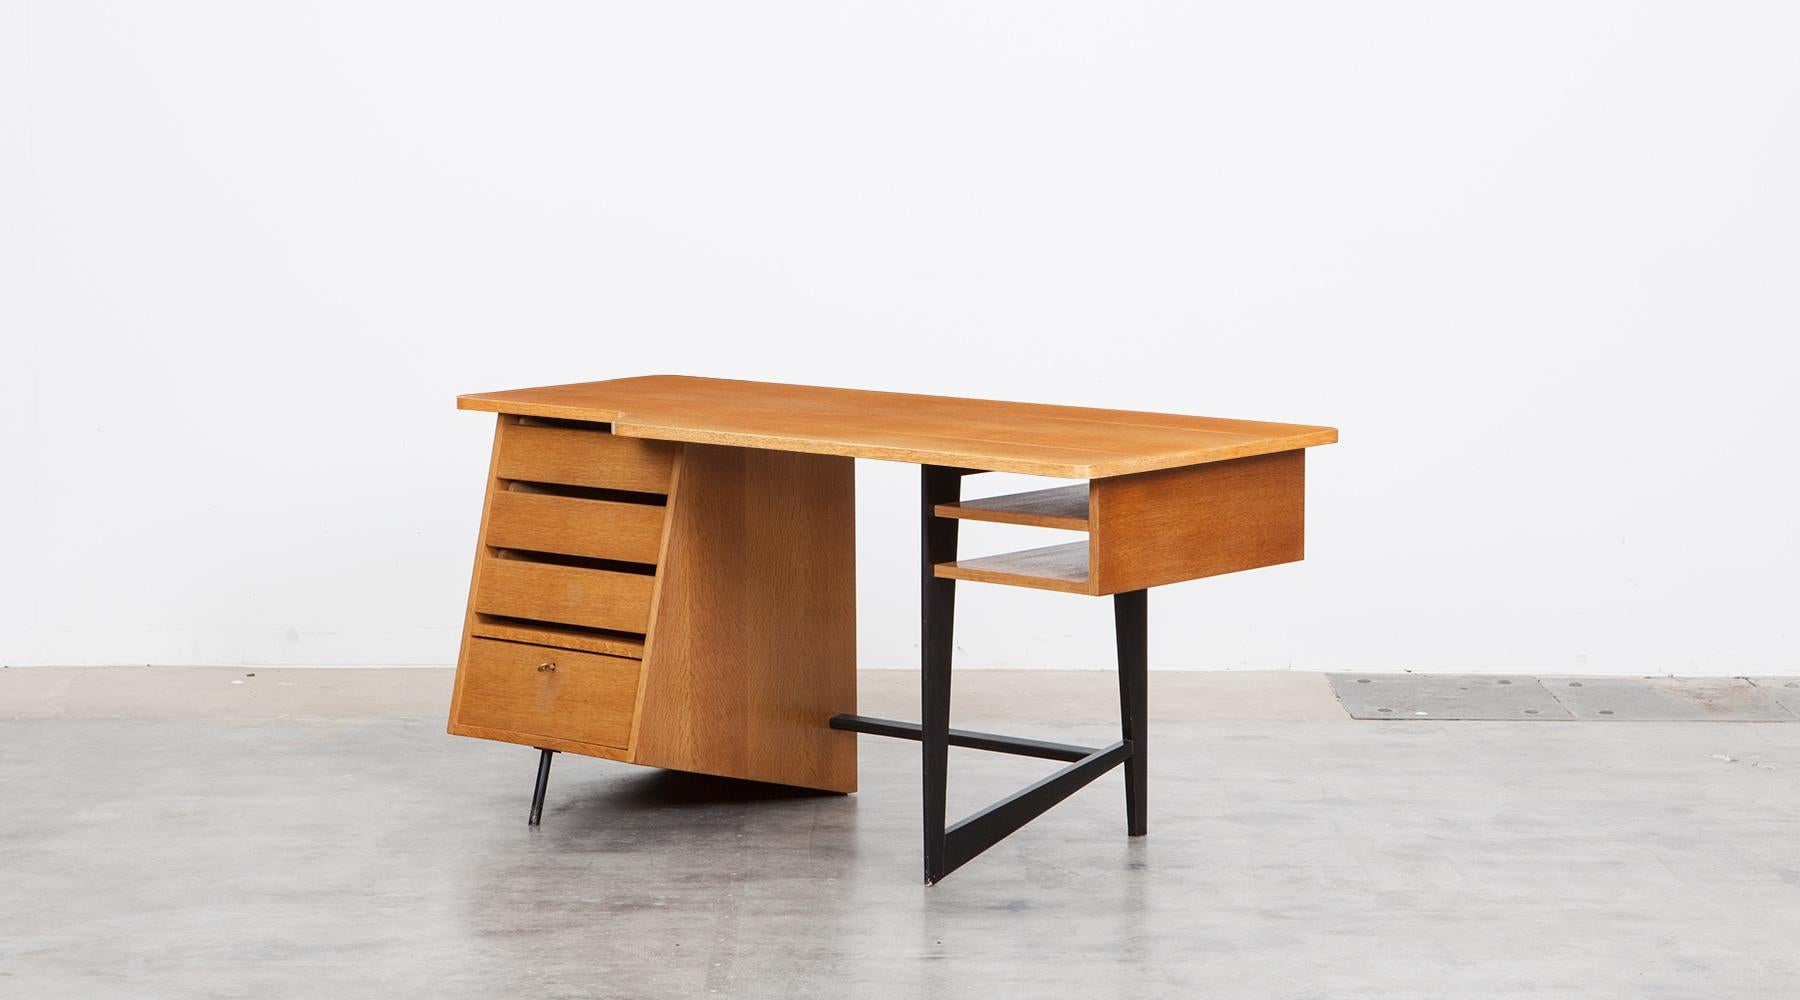 Desk in oak with leather food rest by Claude Vassal, France, 1955.

The beautifully shaped desk designed by Claude Vassal comes with four drawers on one side and two side compartments on the other. A drawer is to lock, the key is available. The